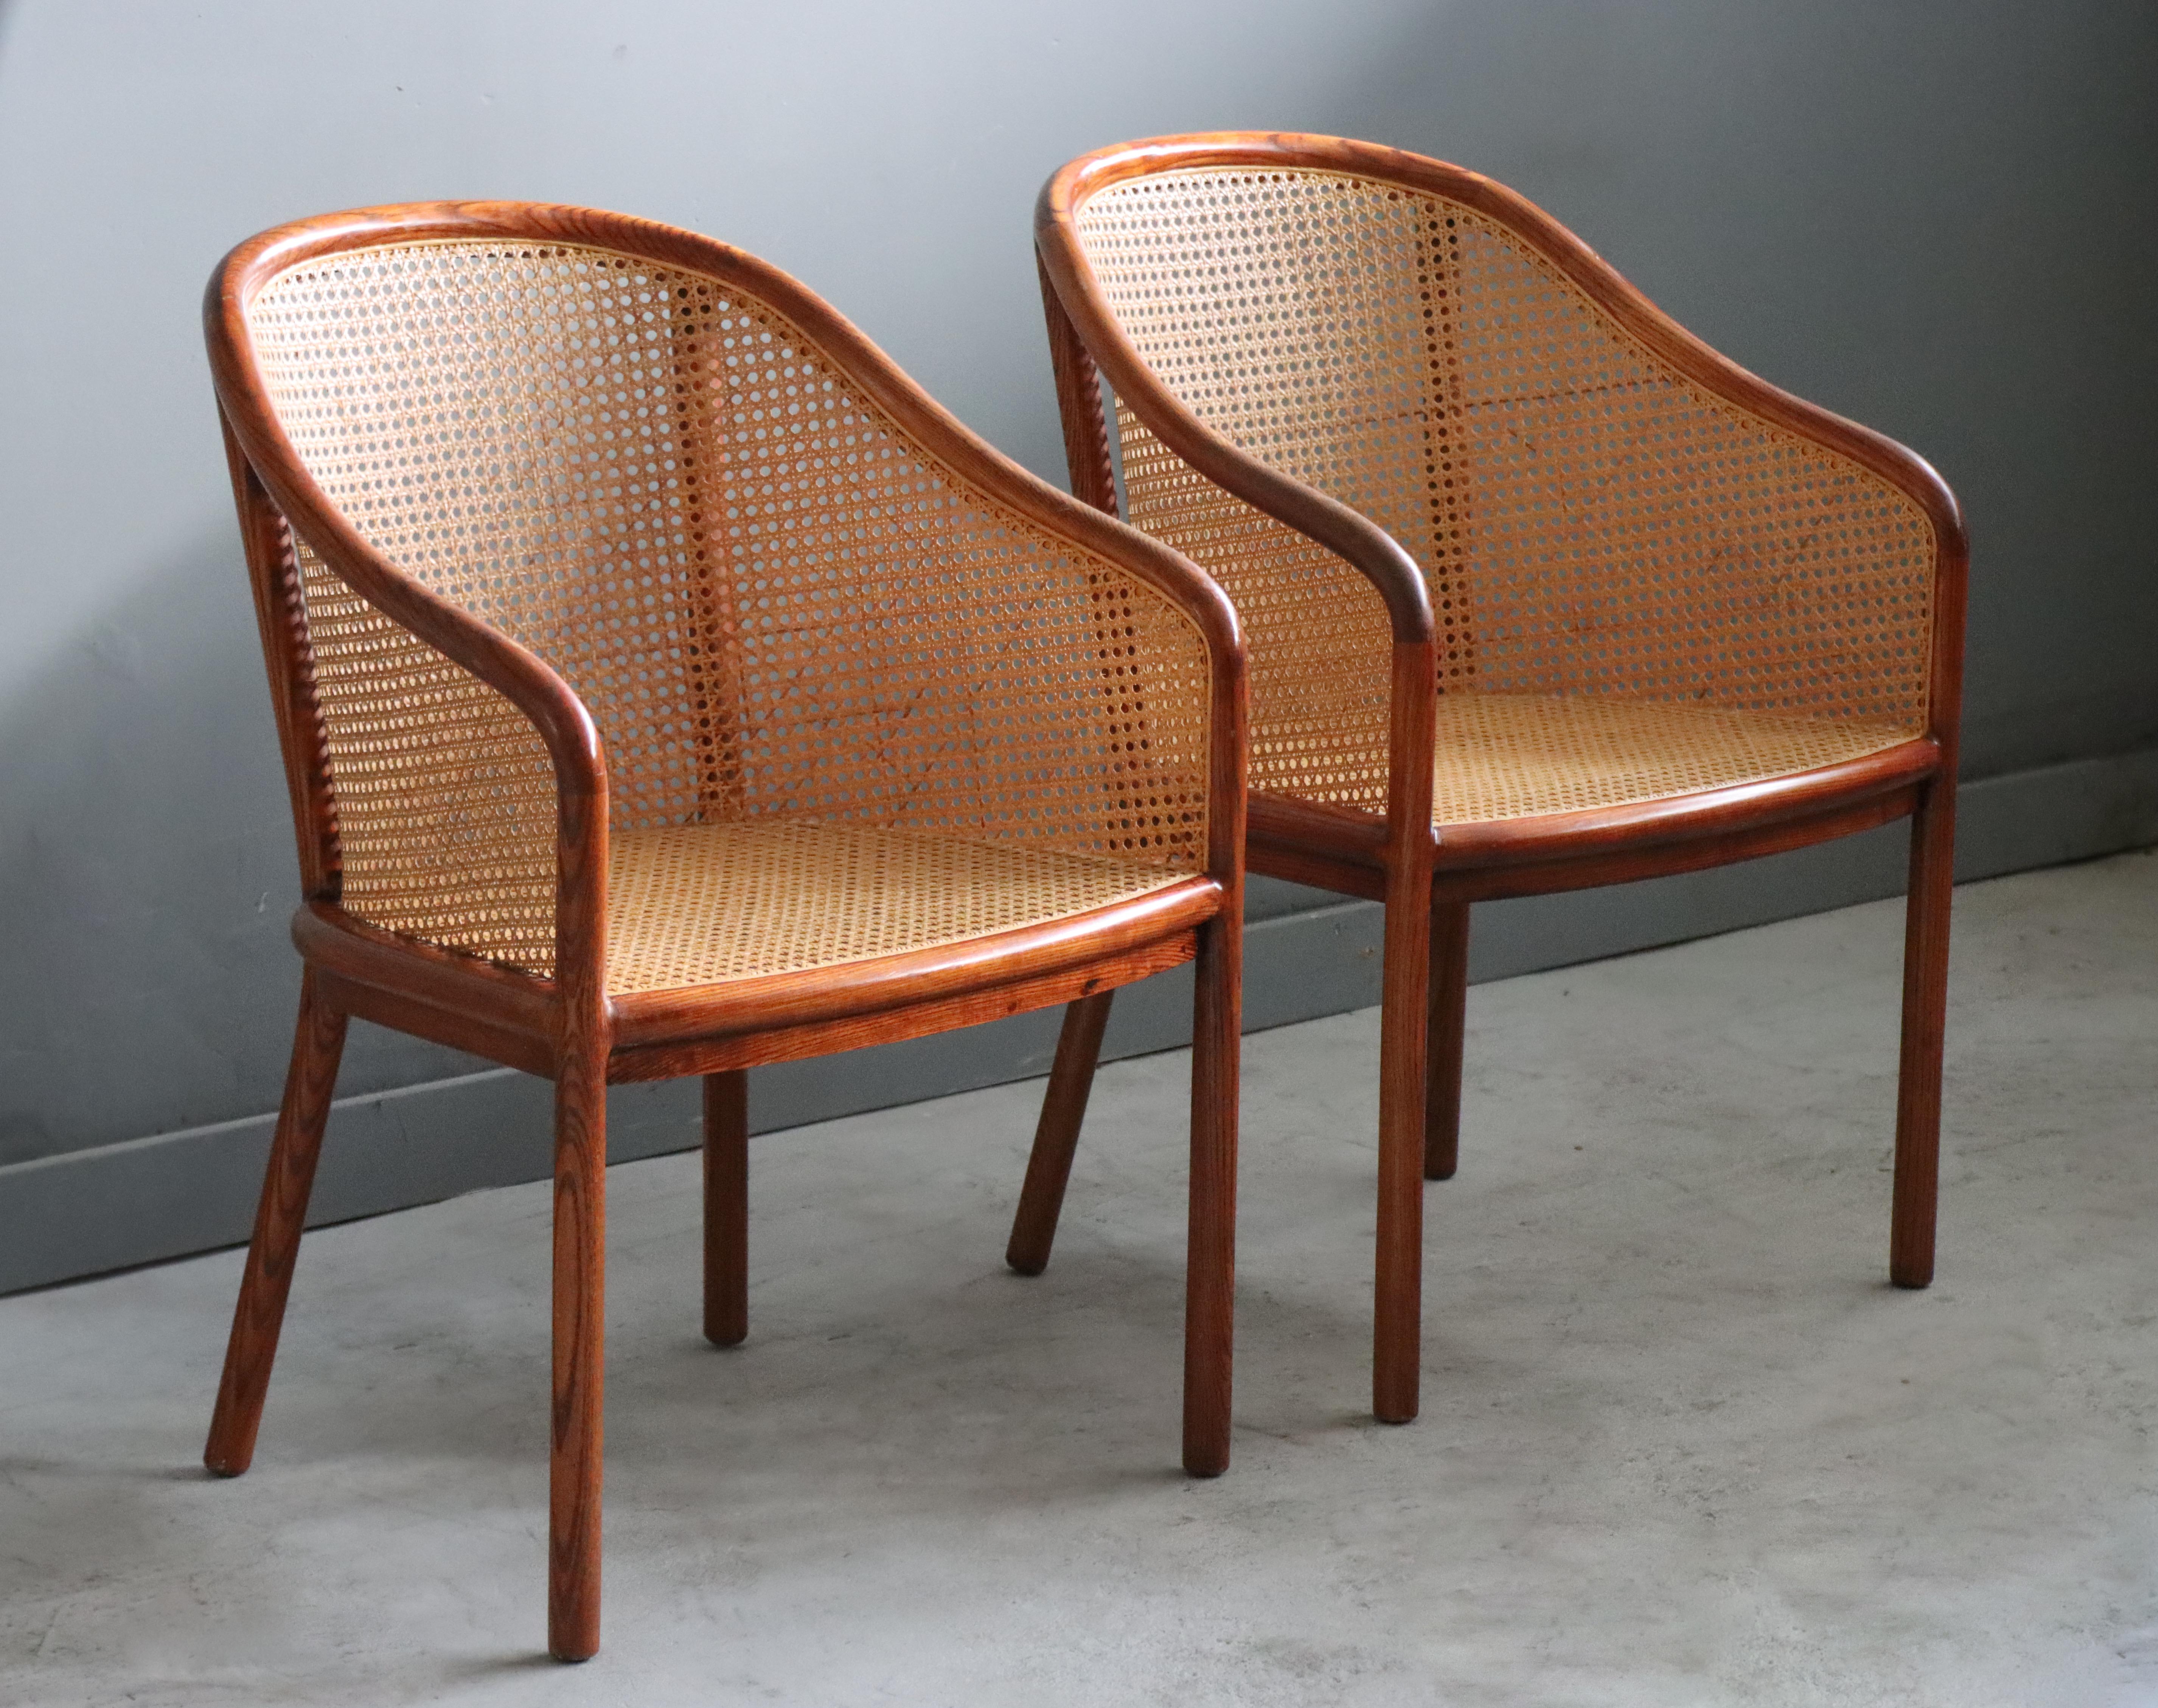 Vintage Pair of ‘Landmark’ Cane Chairs by Ward Bennett for Brickel, 1970, Mohair For Sale 9